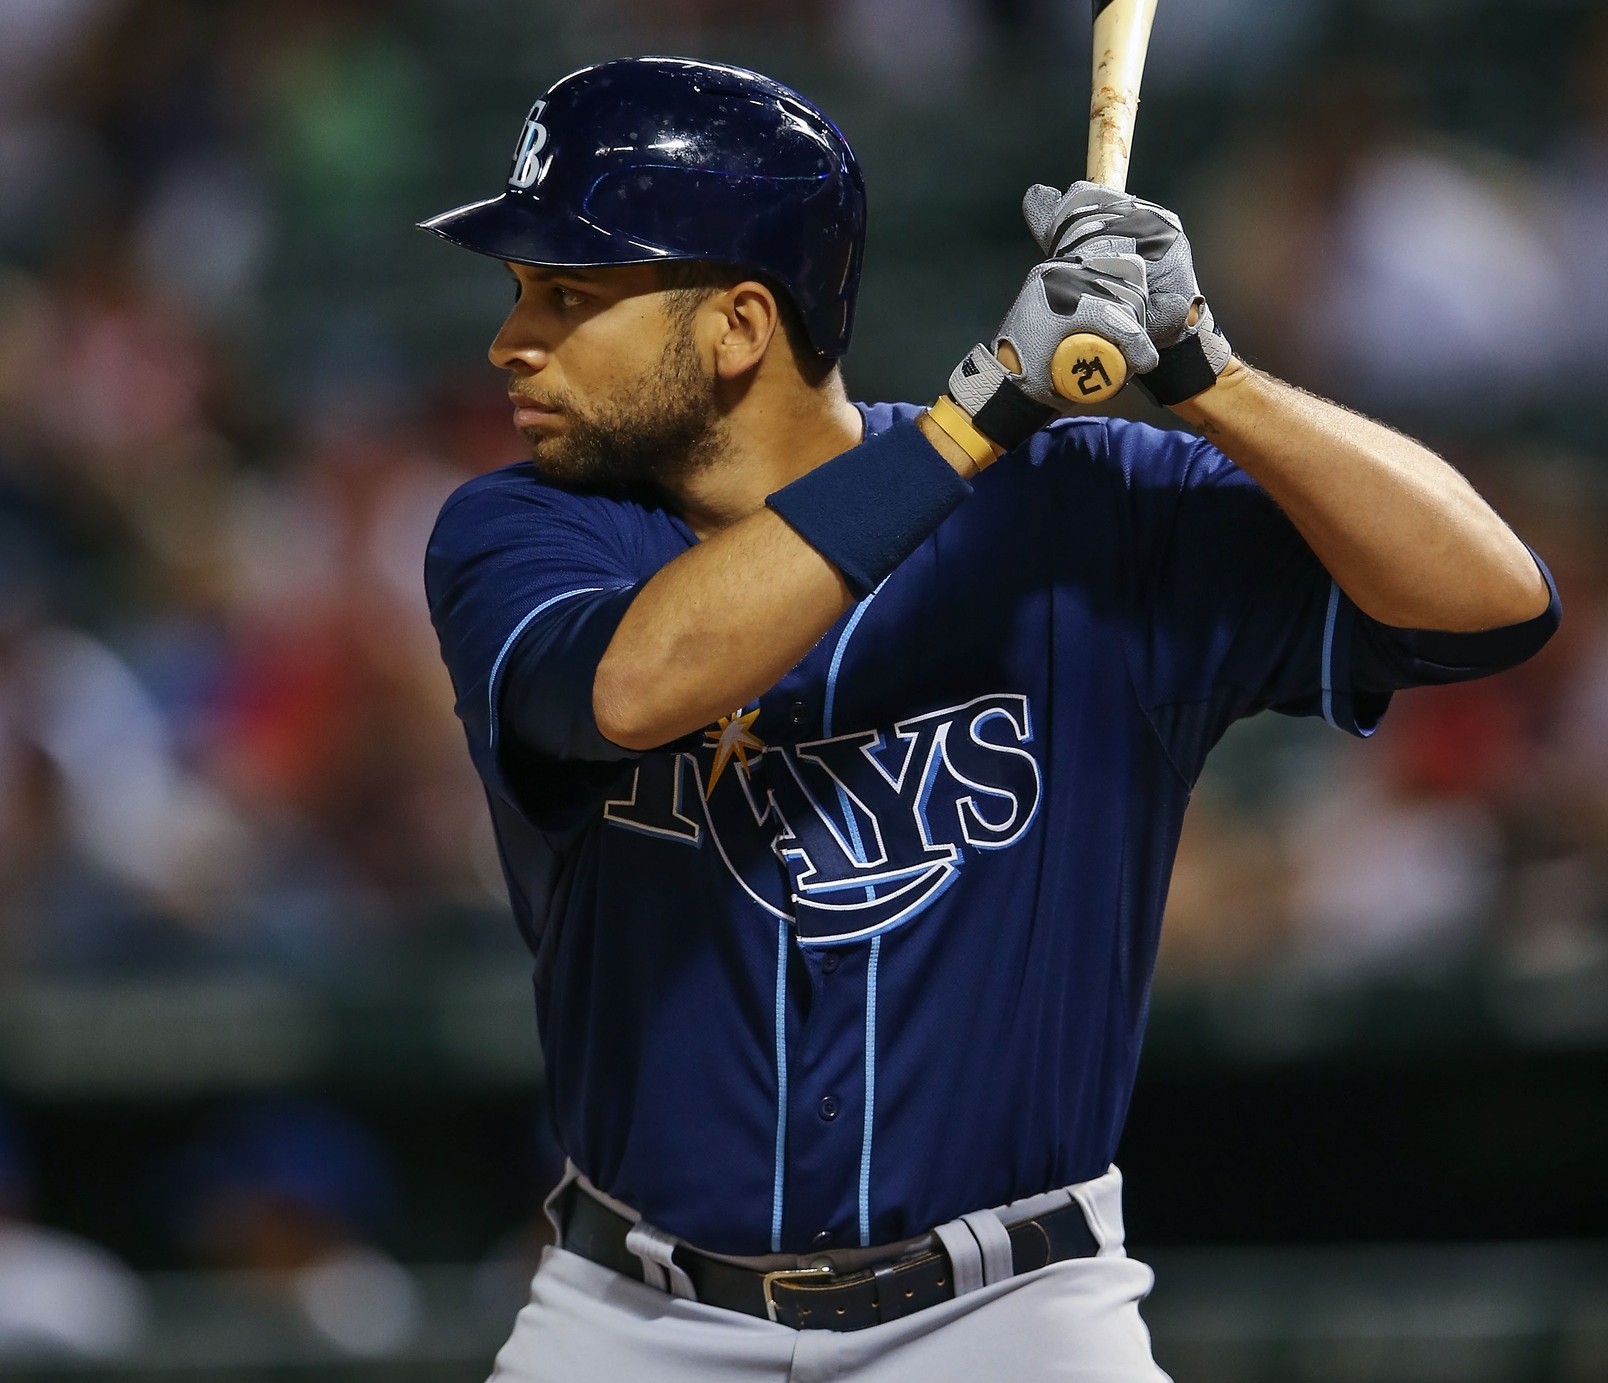 Rays may be forced to cut James Loney and eat his $8 million salary